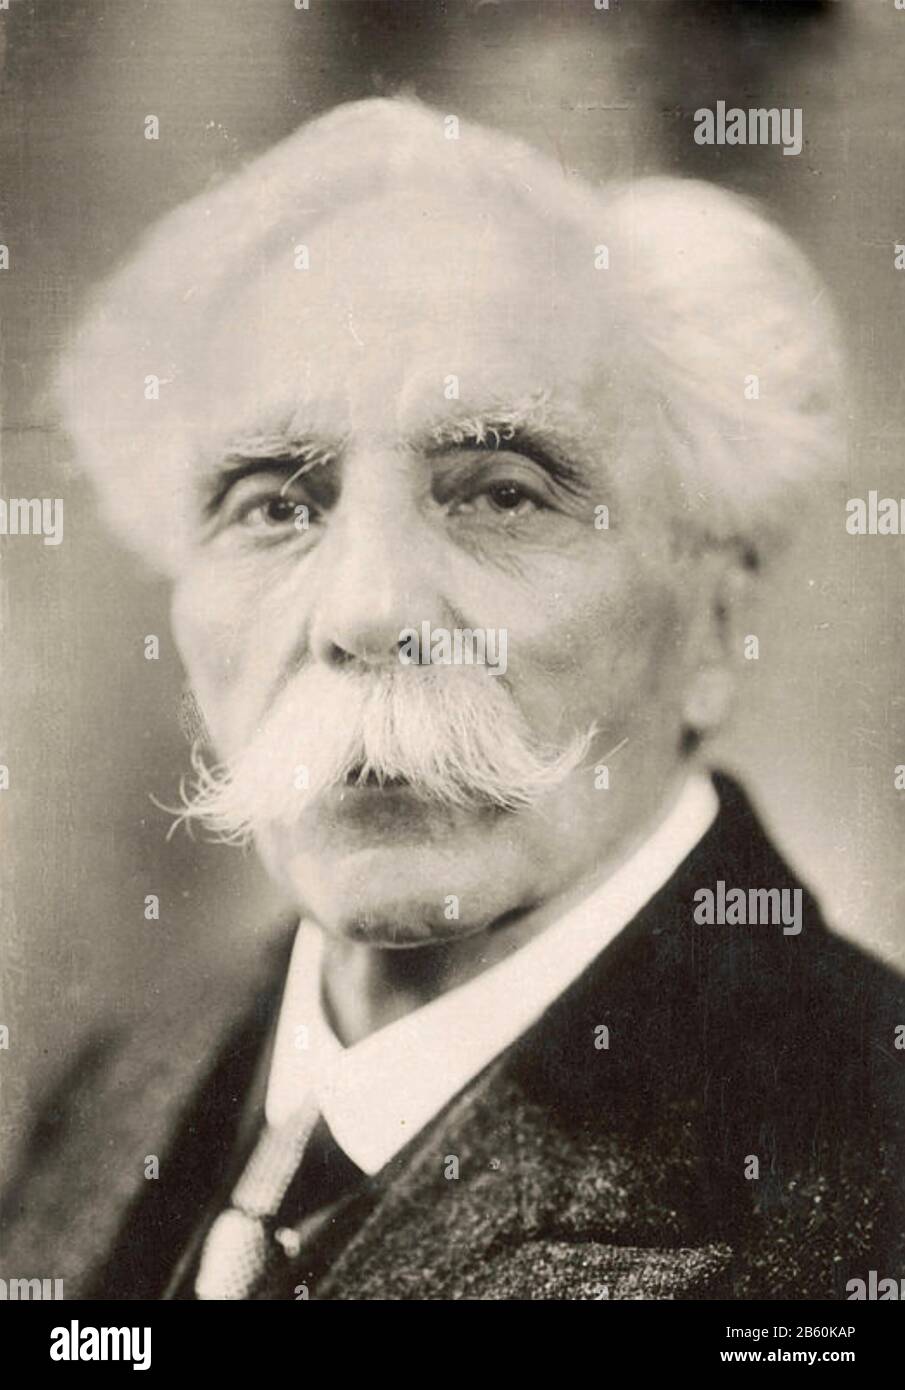 GABRIEL FAURE (1845-1924) French composer about 1910 Stock Photo